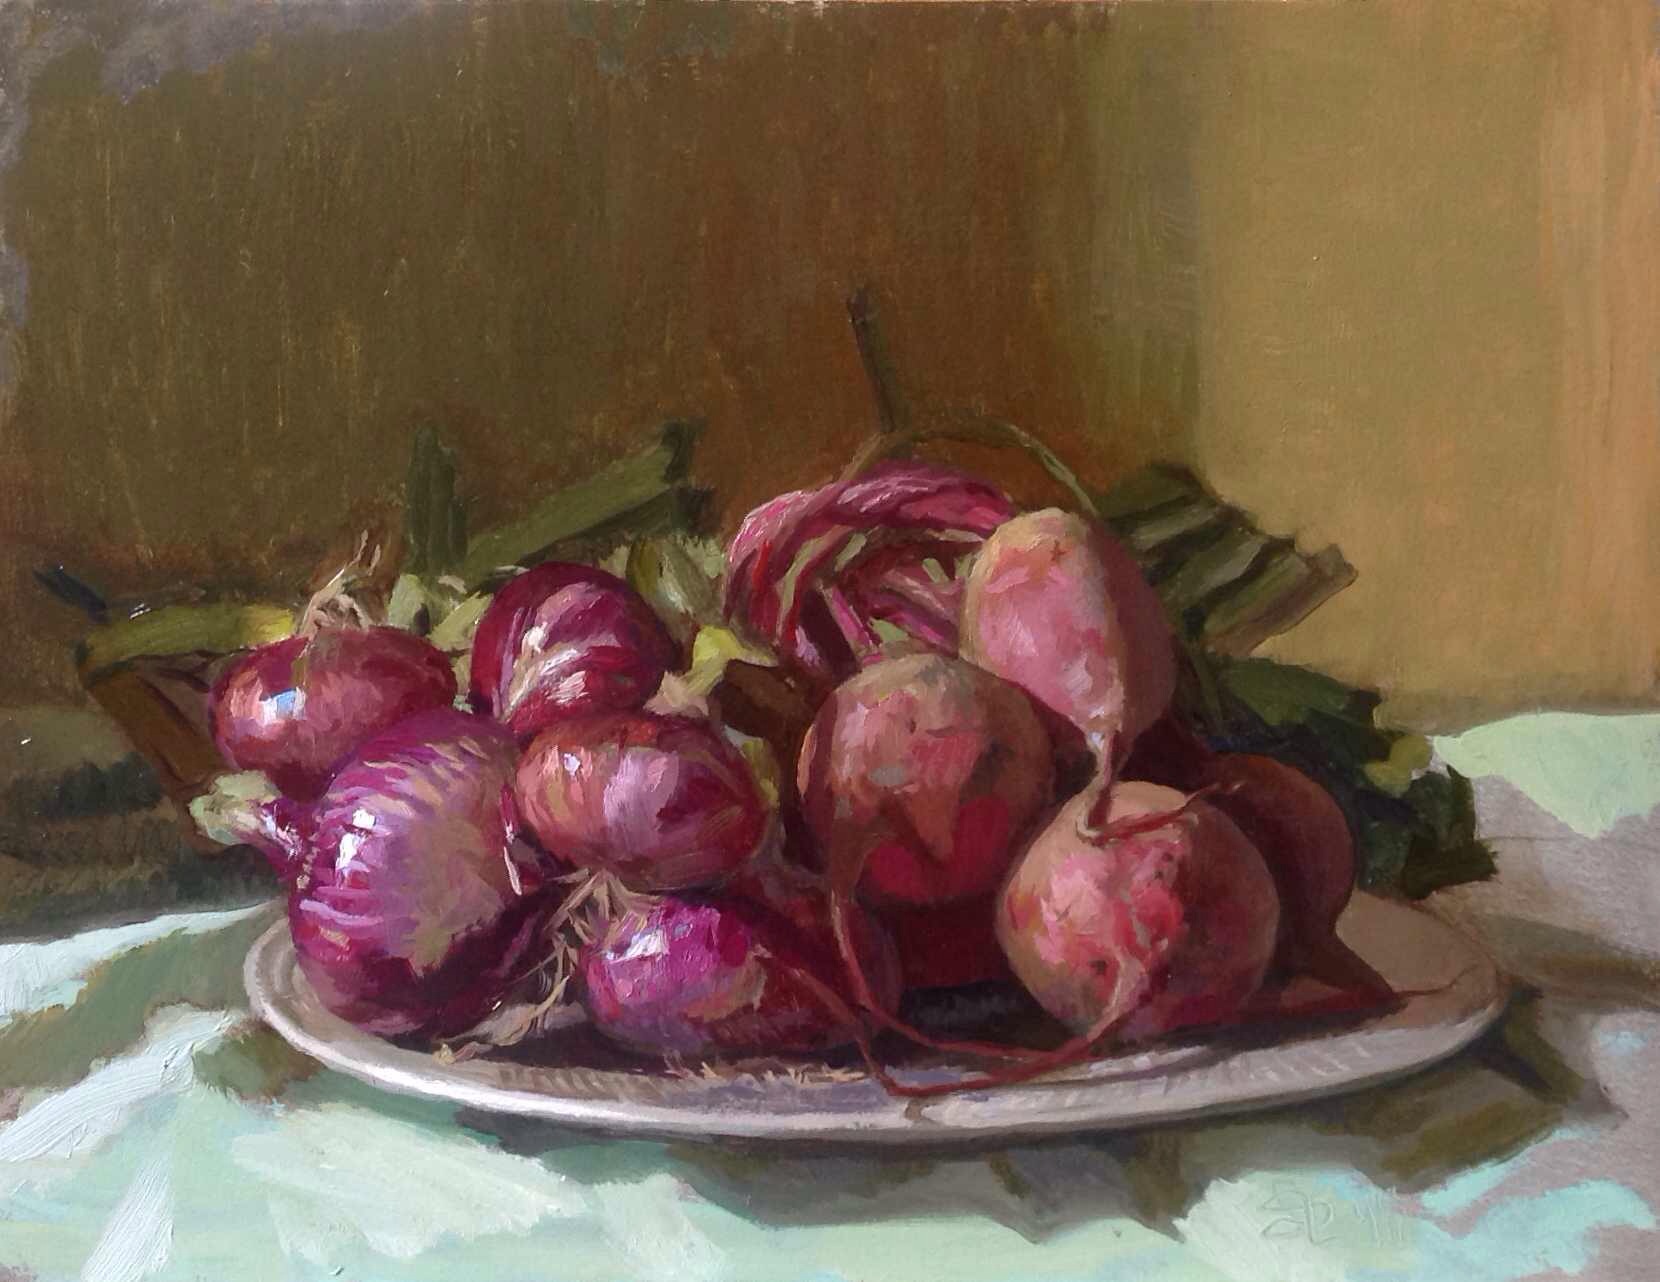 Beets and Red Onions 11x14 inches oil on panel 2014